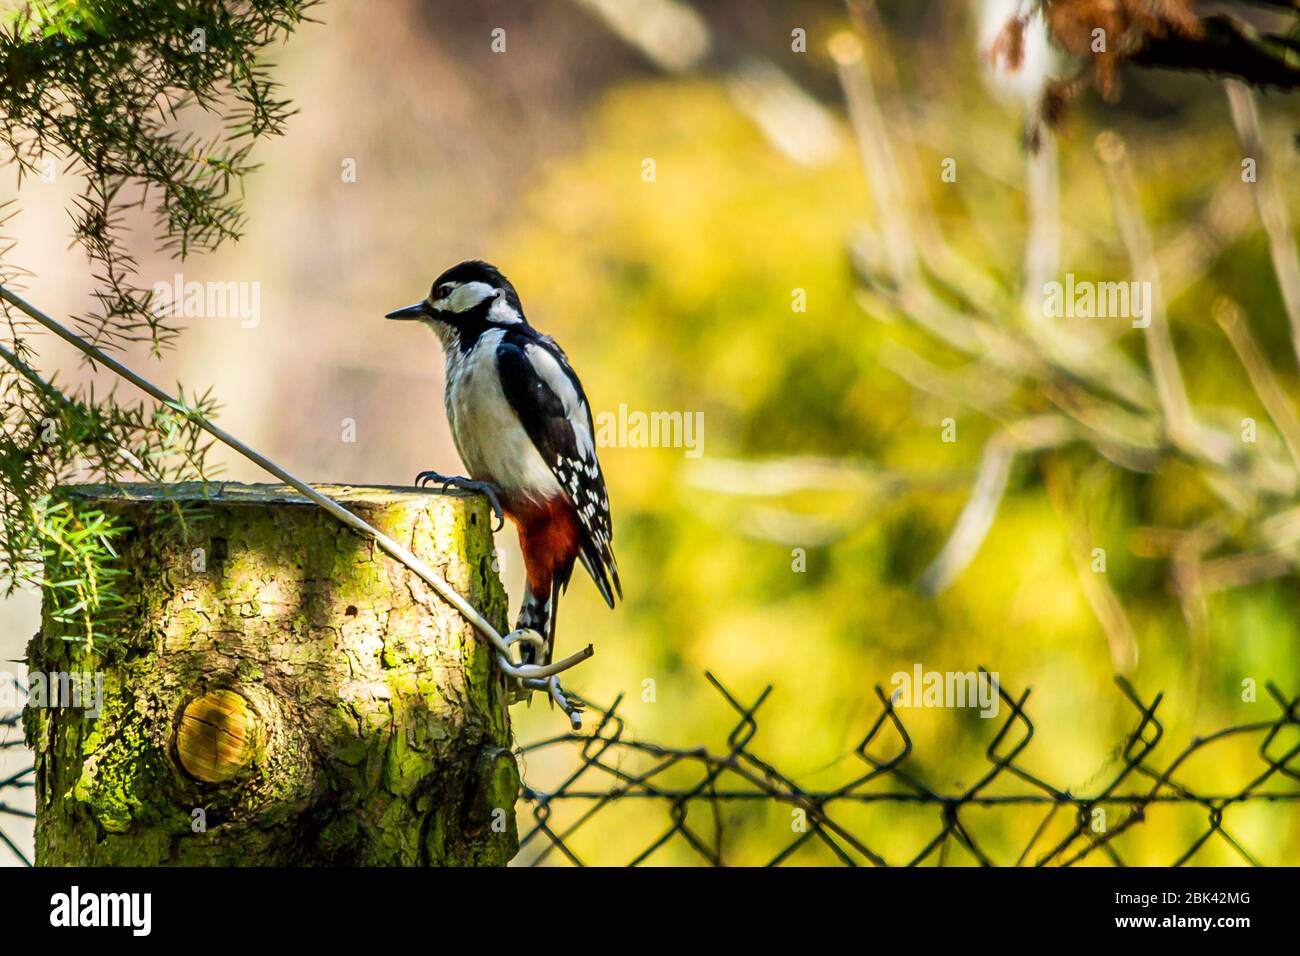 Great spotted woodpecker, Greater spotted woodpecker - a species of medium bird of the woodpecker family. Stock Photo